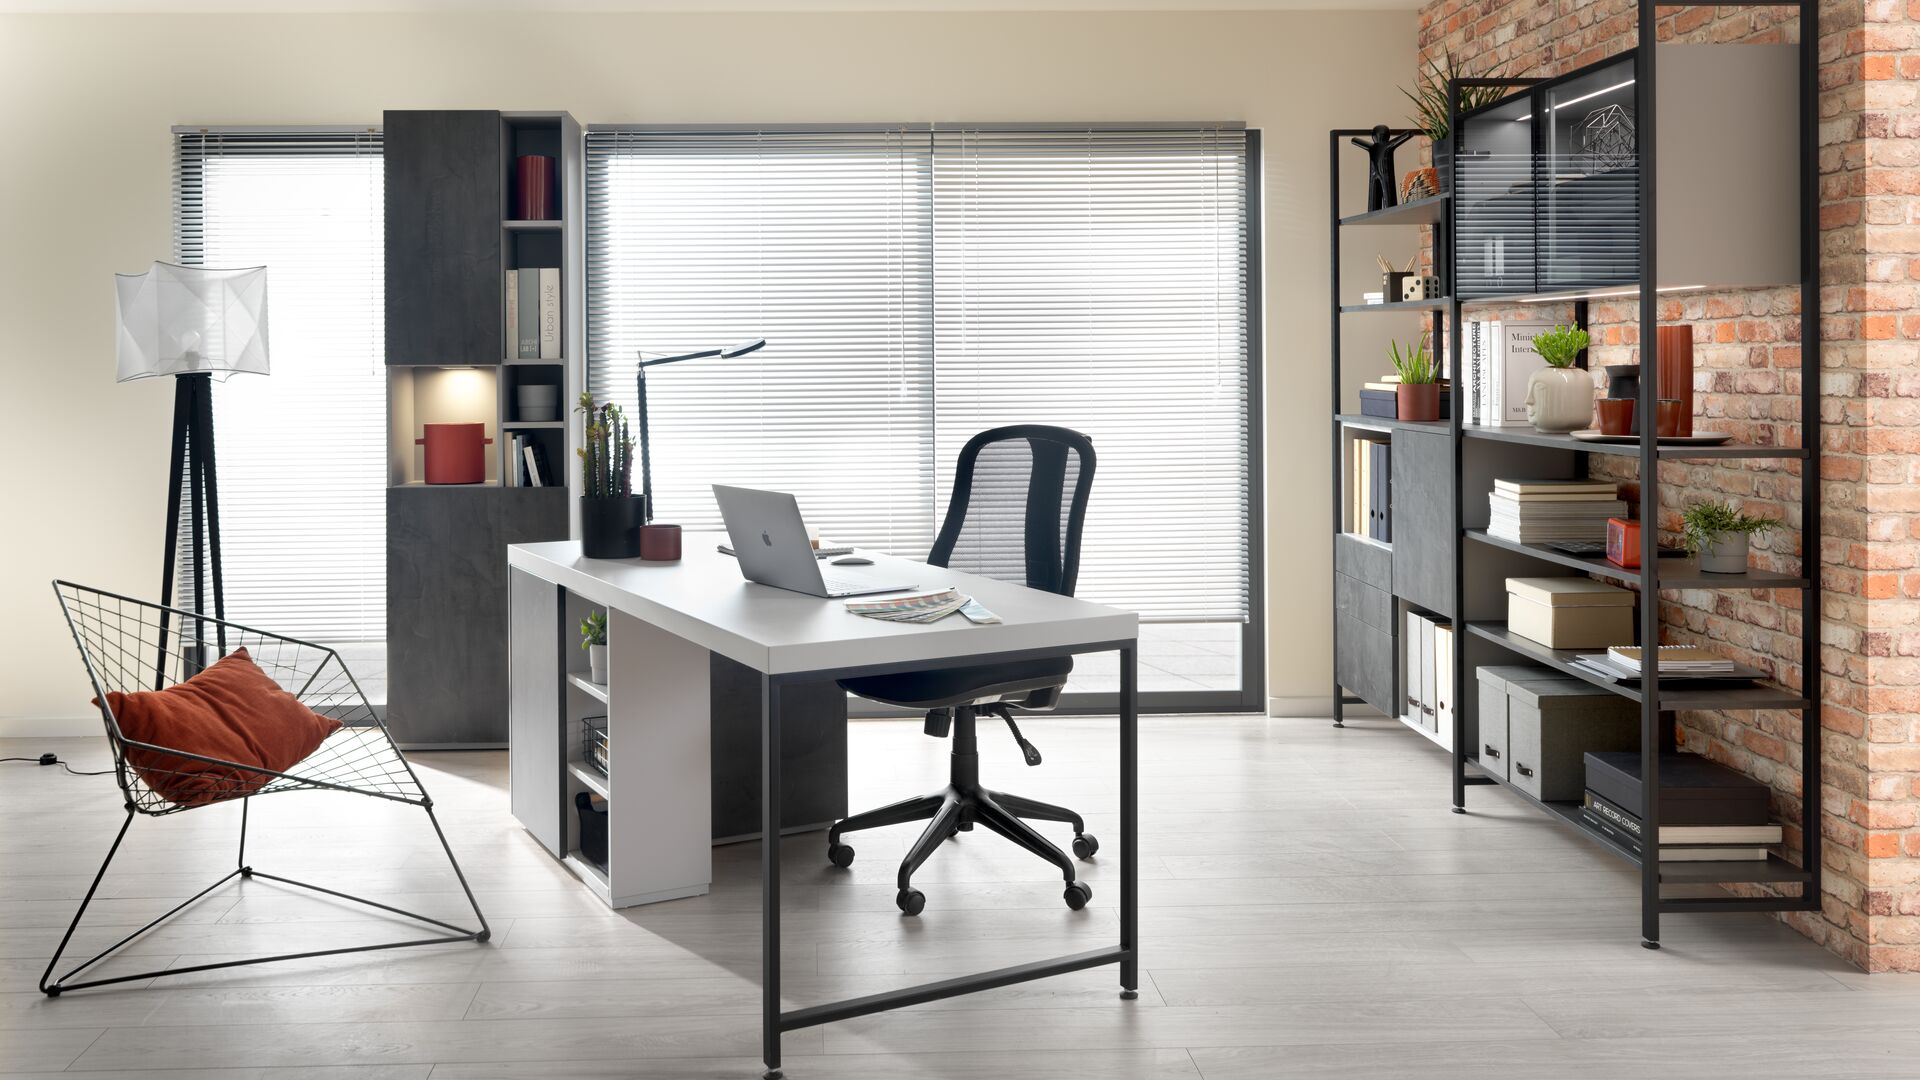 Industrial-style desk with black metal shelves and grey units